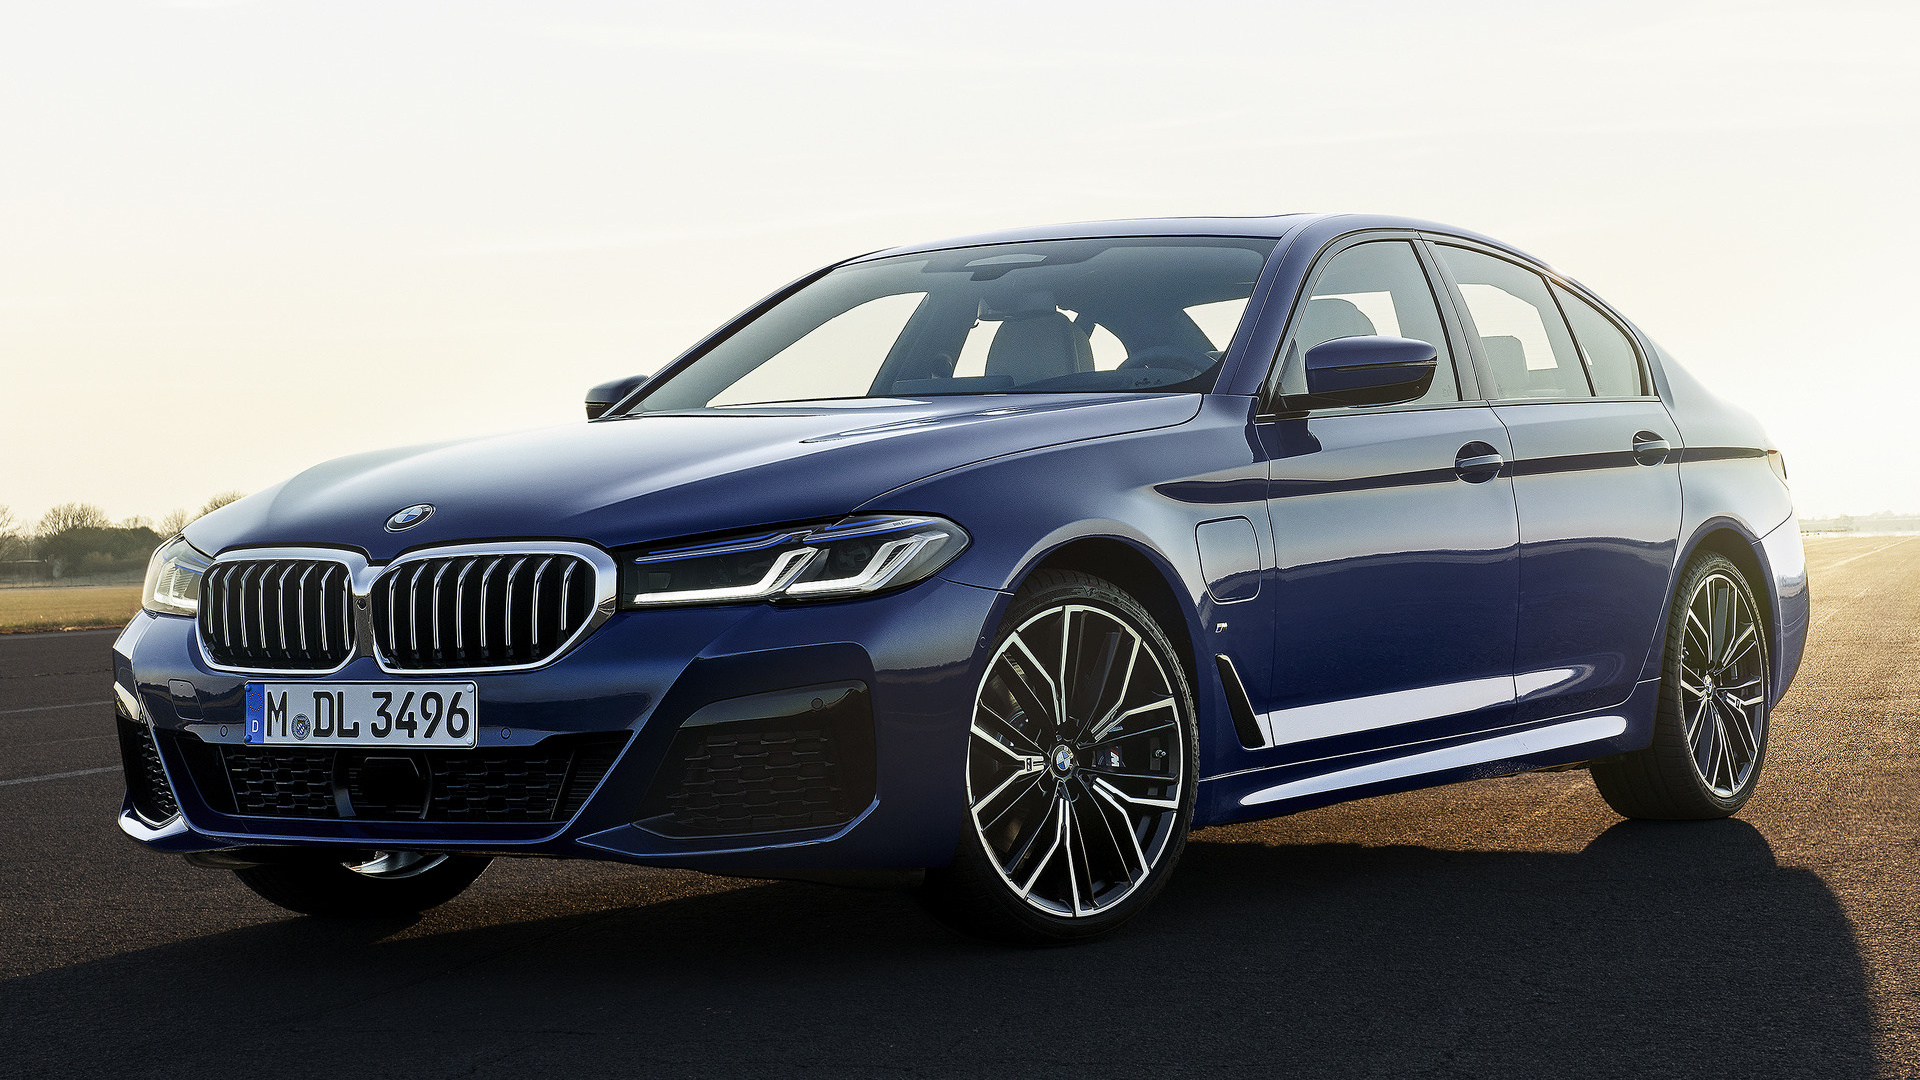 2020 BMW 5 Series Plug-In Hybrid M Sport - Wallpapers and HD Images